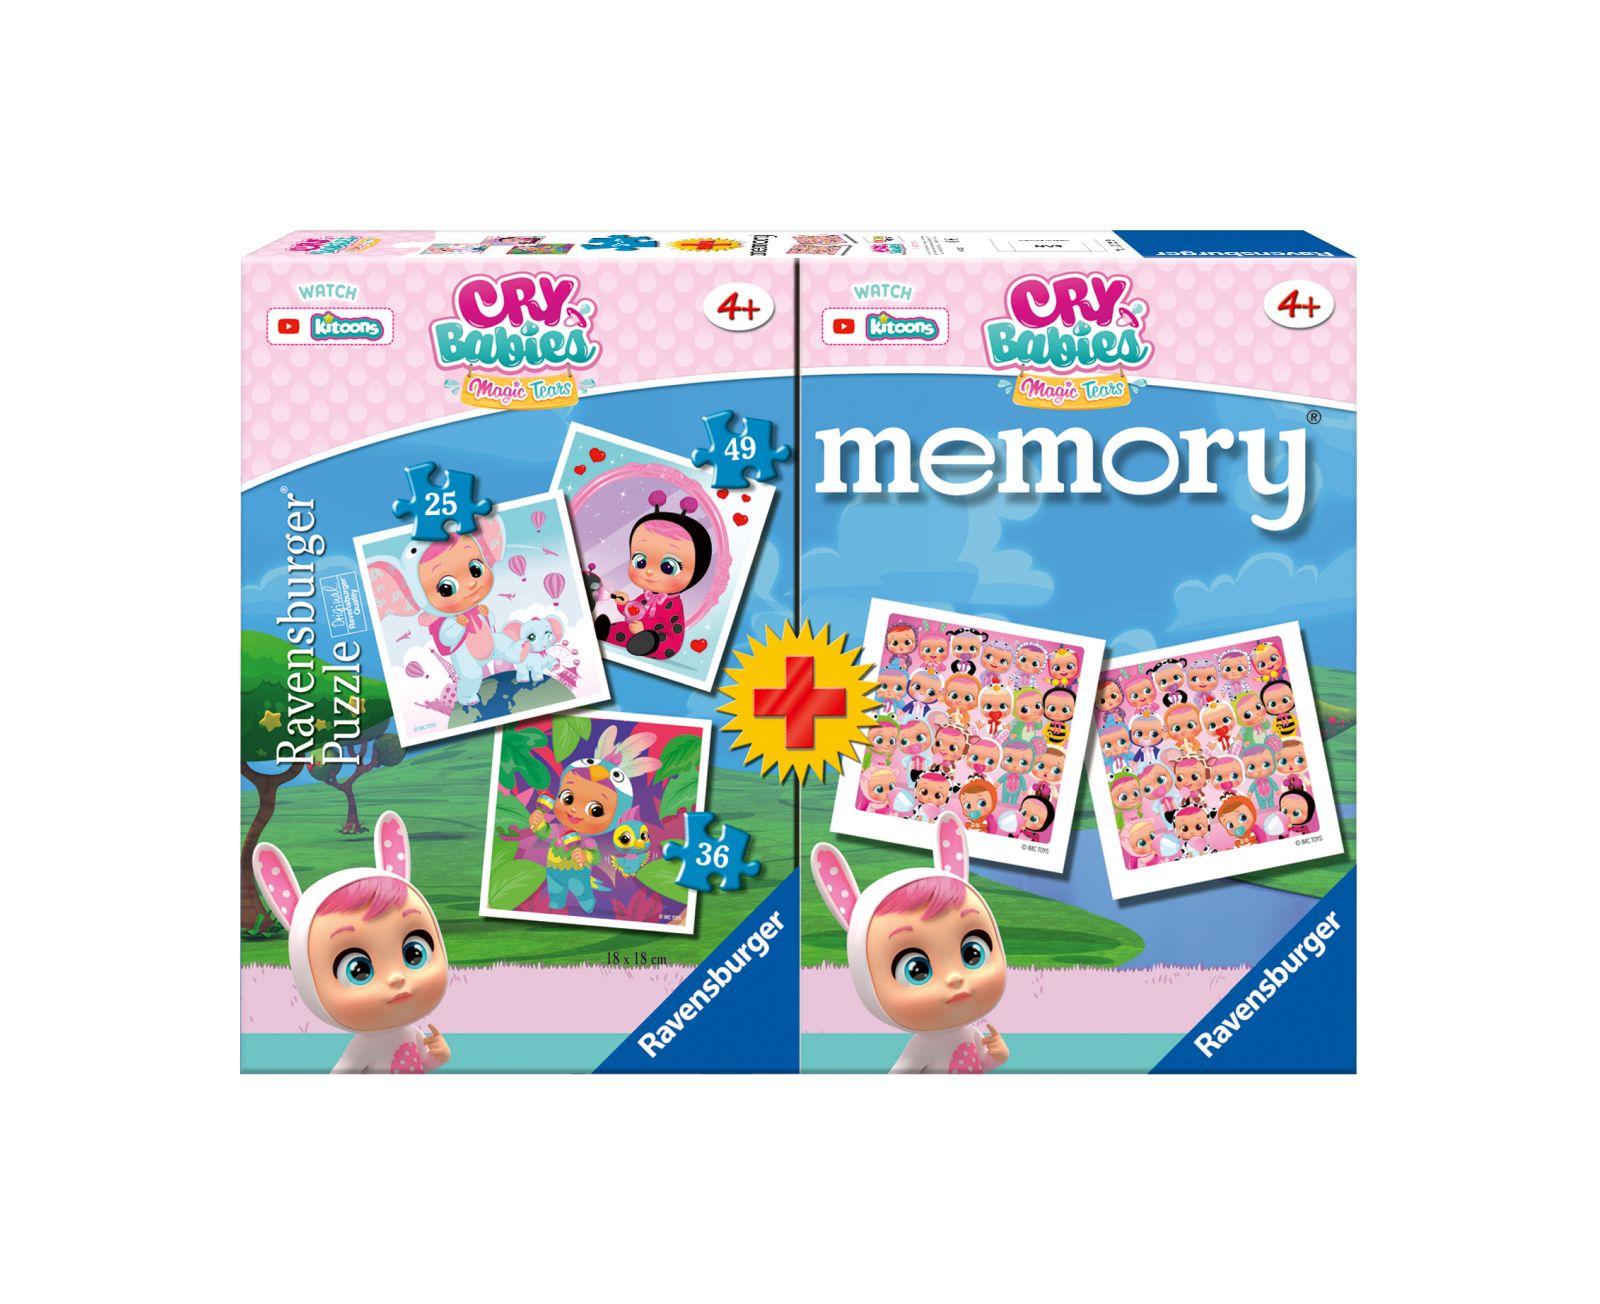 Ravensburger multipack memory®+ 3 puzzle - cry babies - CRY BABIES, RAVENSBURGER